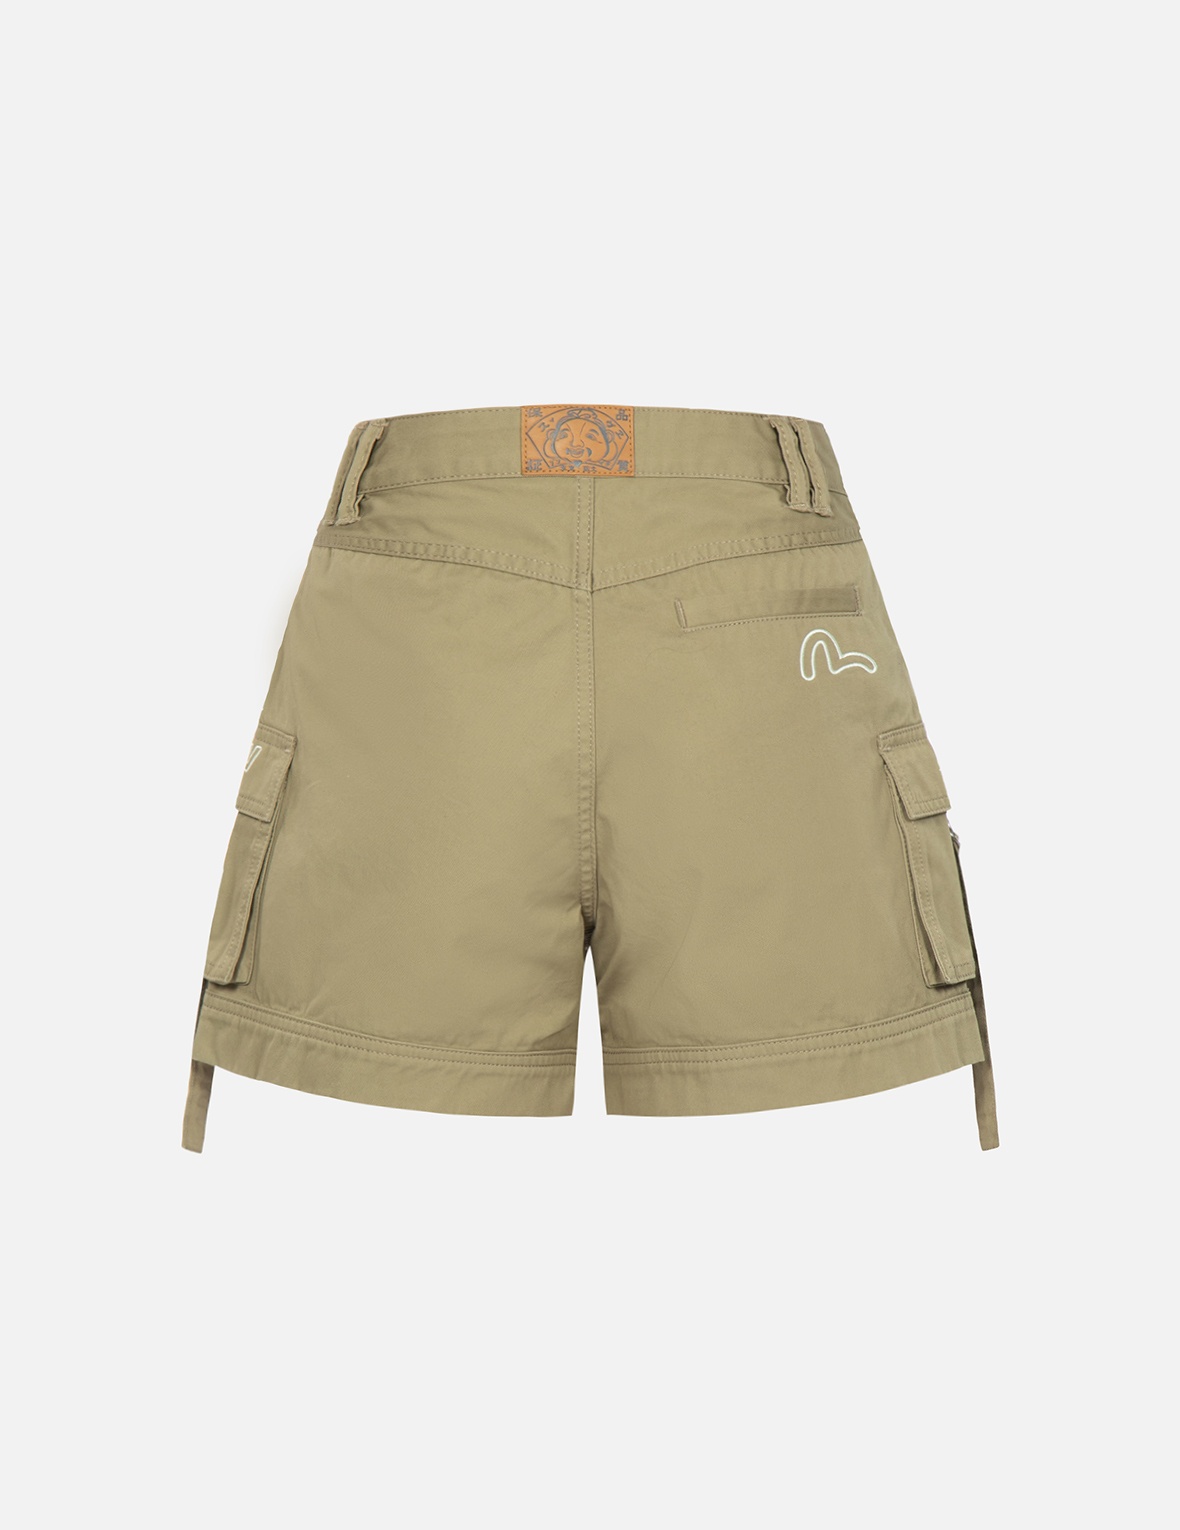 SEAGULL AND LOGO EMBROIDERY CARGO SHORTS - 2